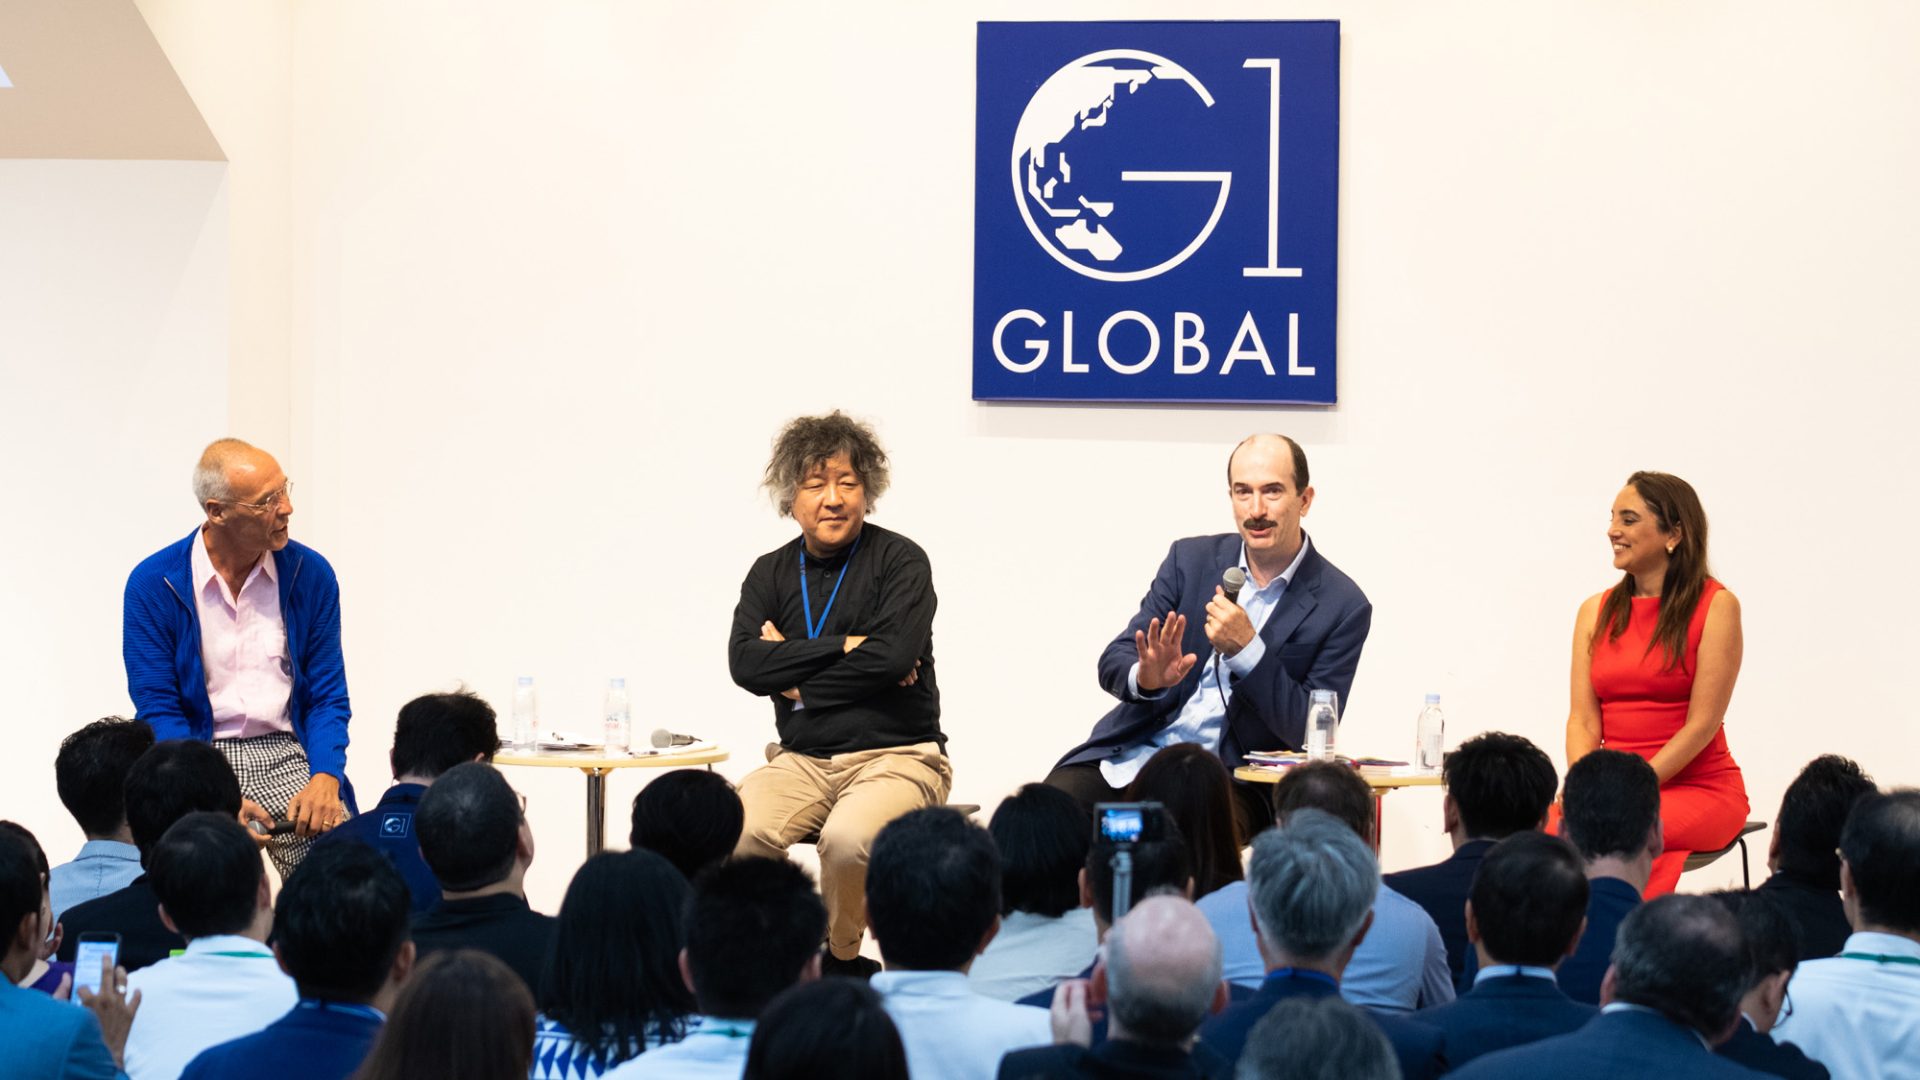 Sustainable Innovation in Times of Disruption: Choices for a Better Society (G1 Global 2019)